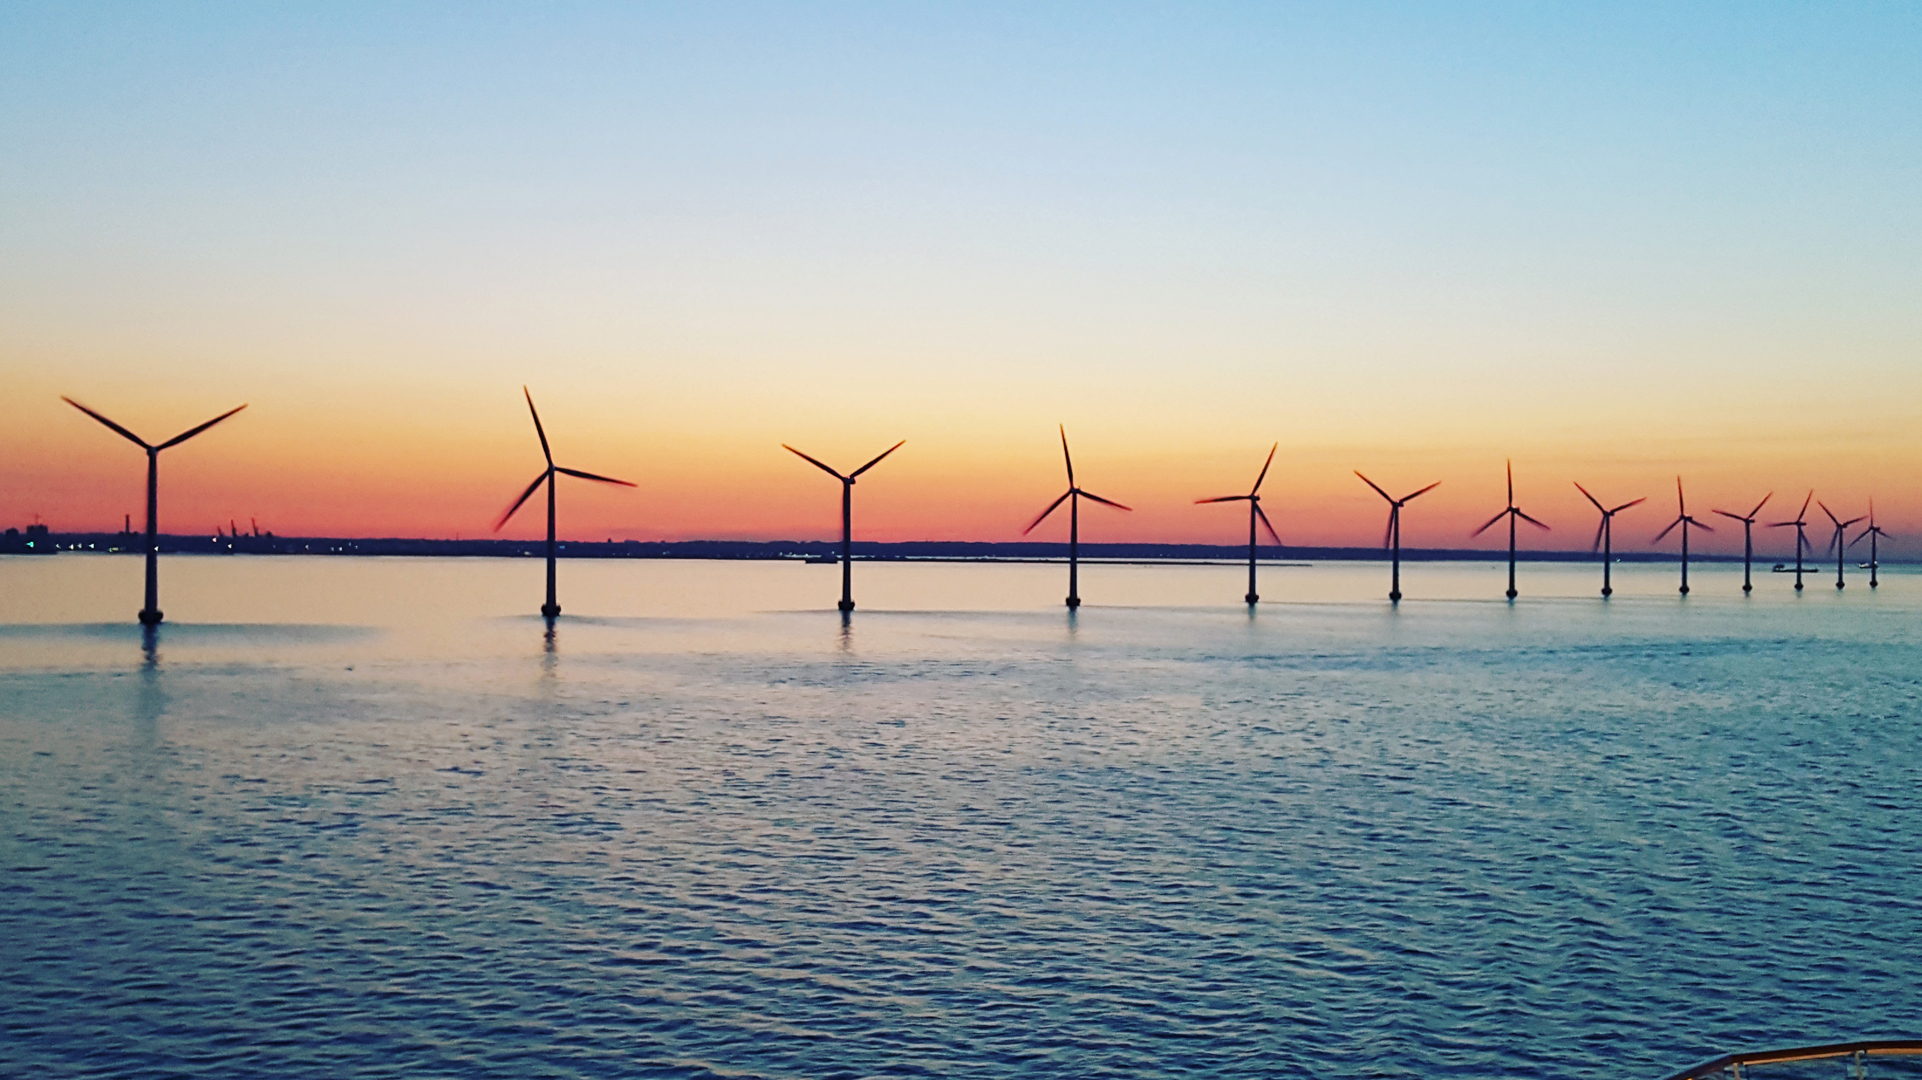 Wind turbines in the sea at sunset.